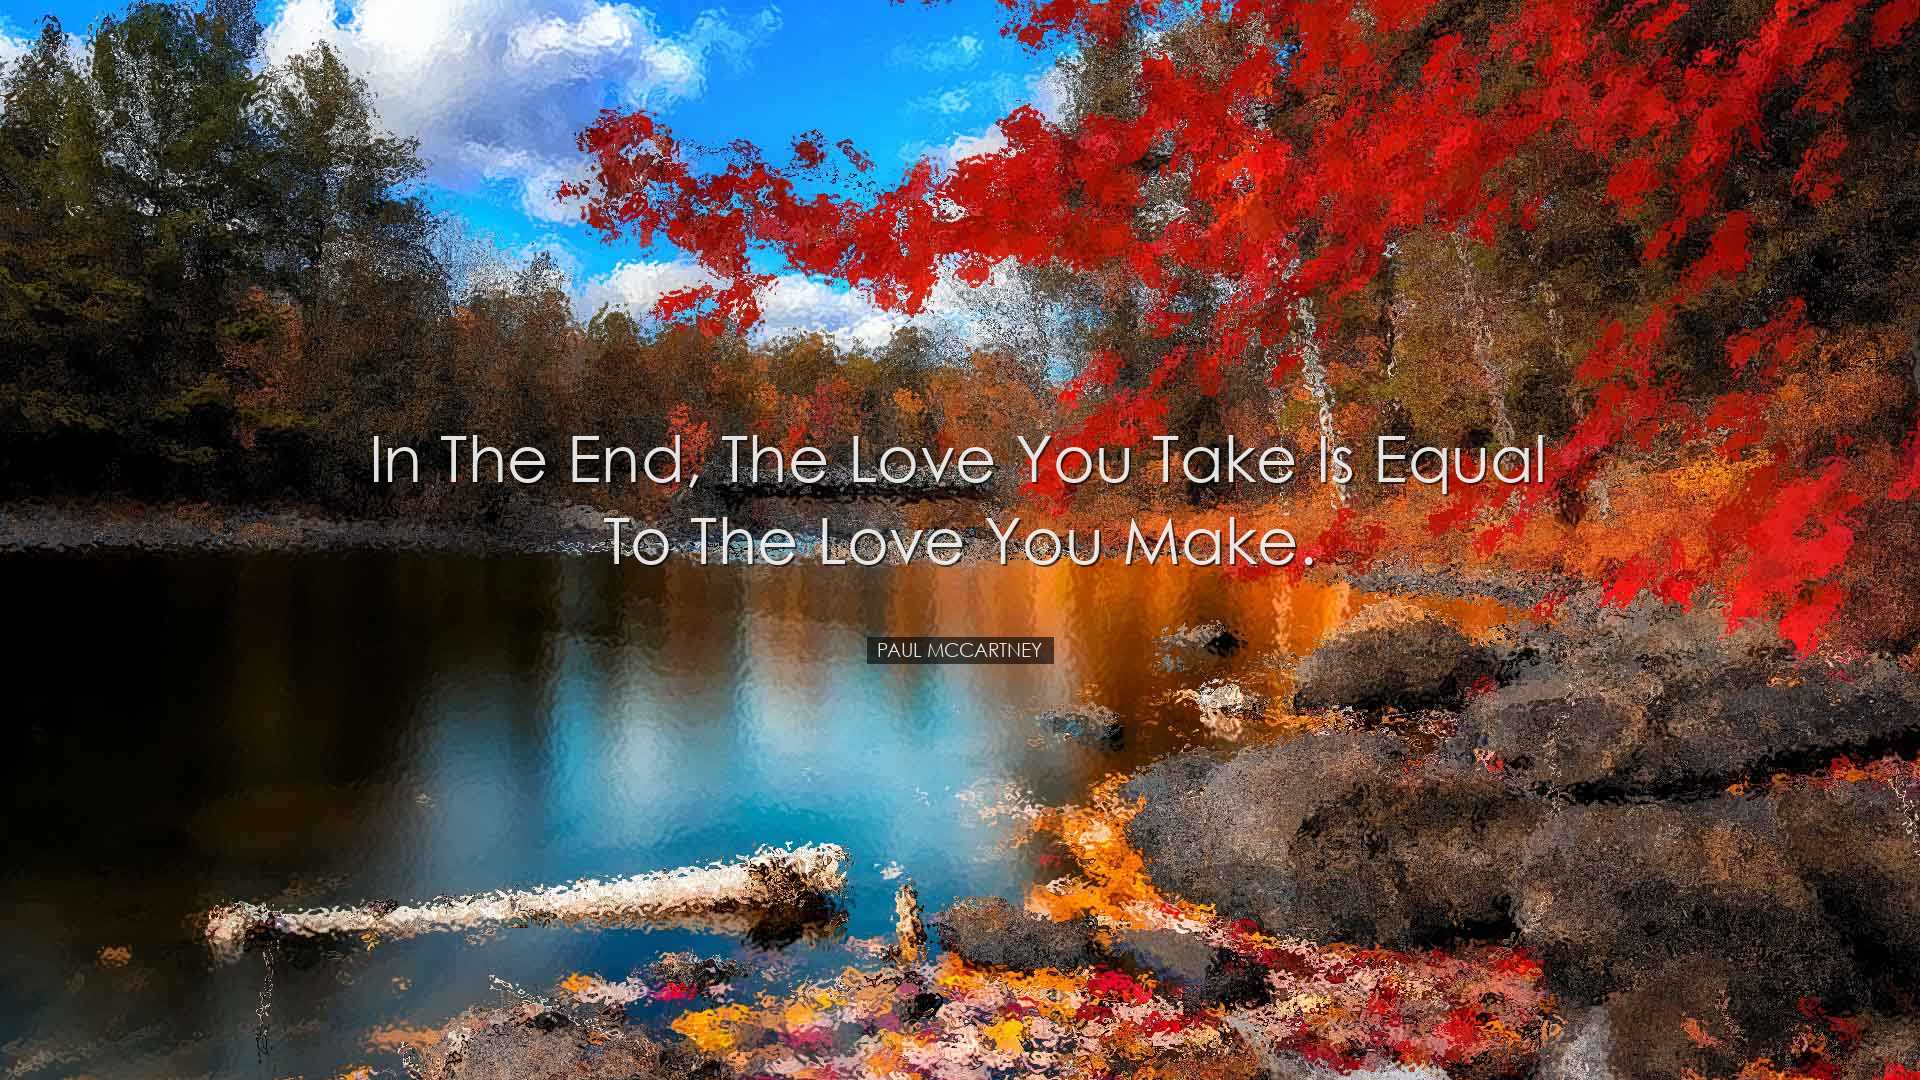 In the end, the love you take is equal to the love you make. - Pau